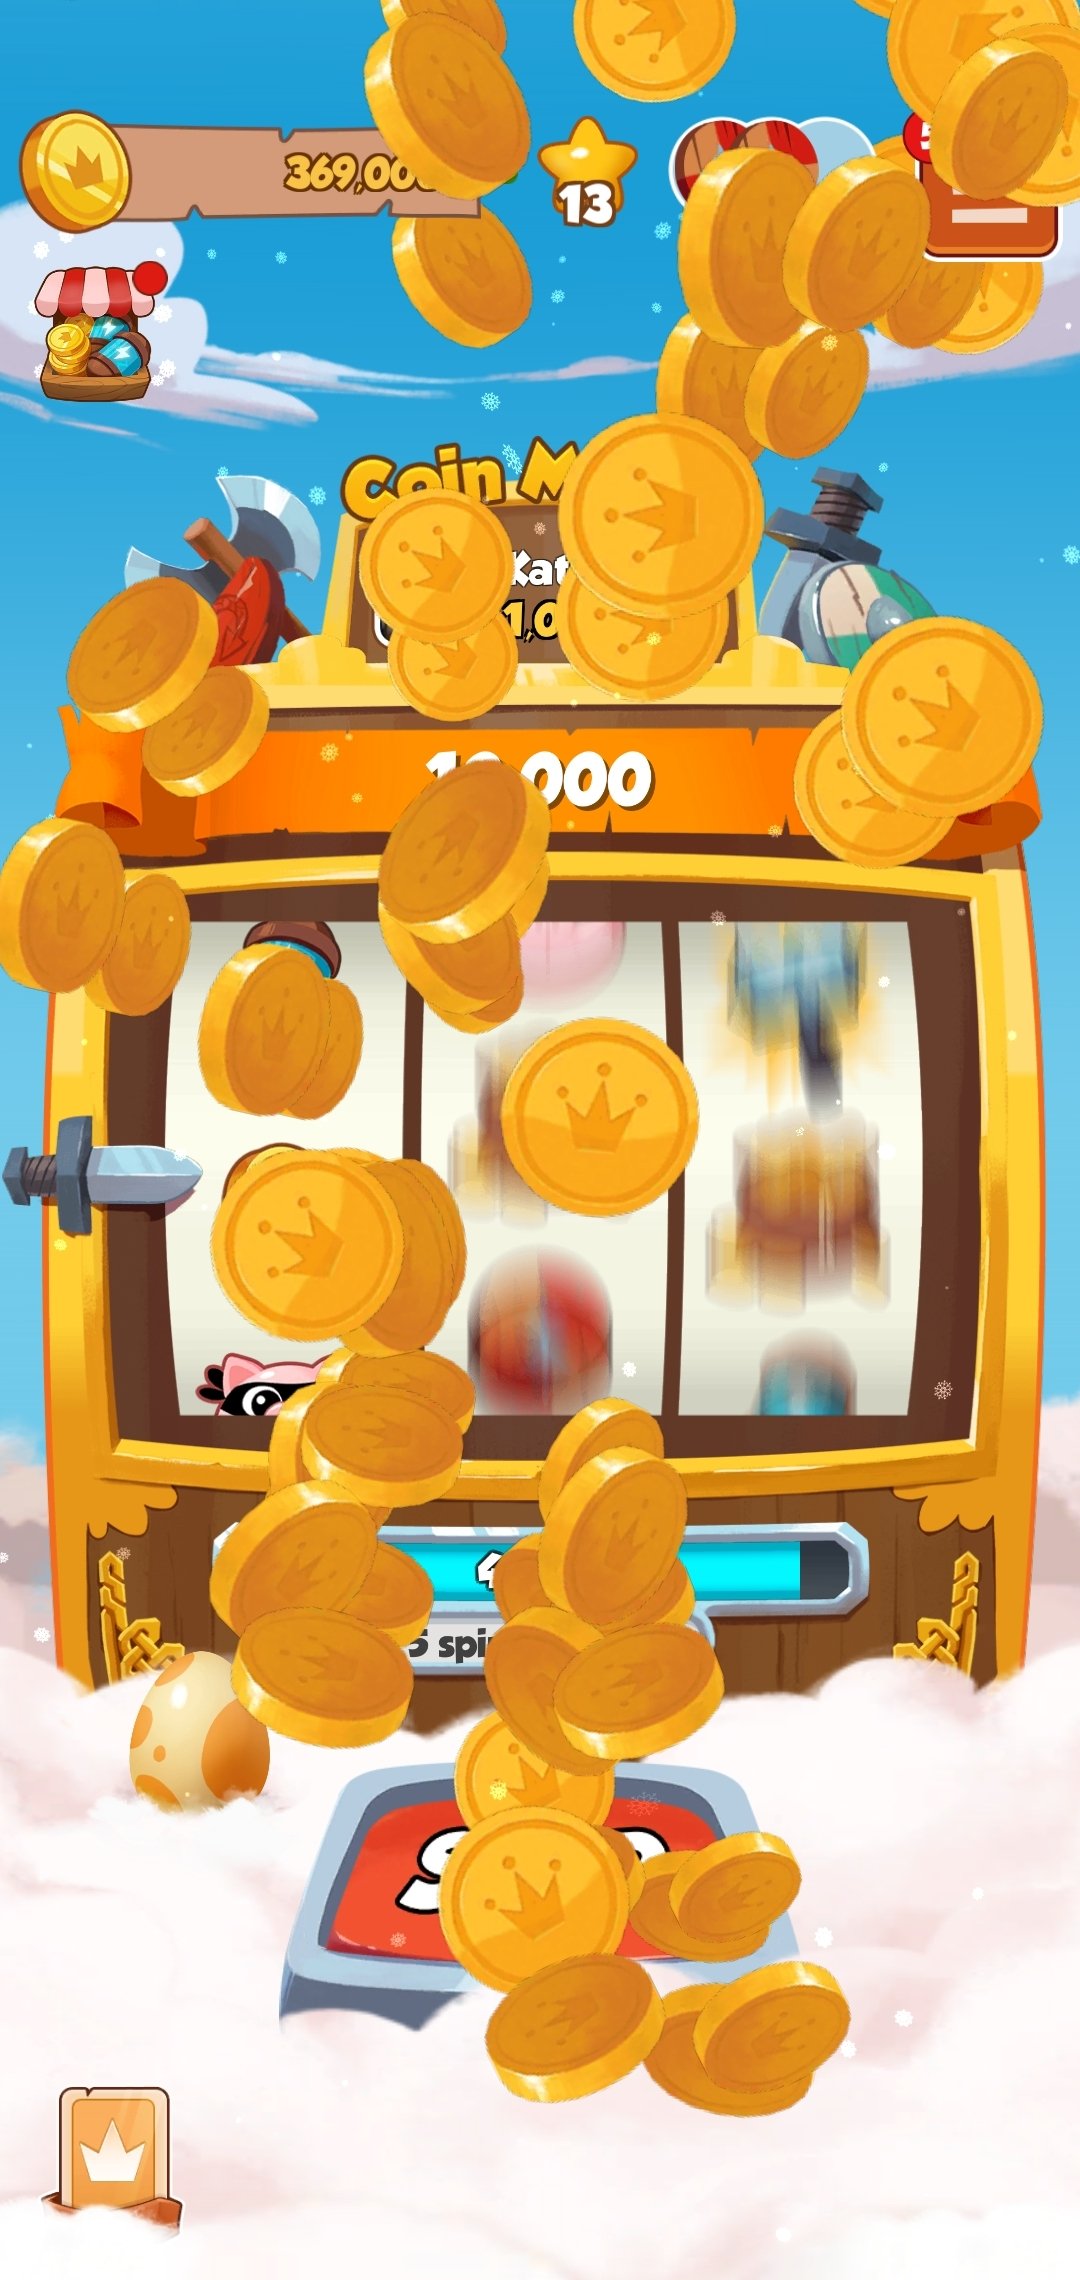 Download Coin Master APK for Android